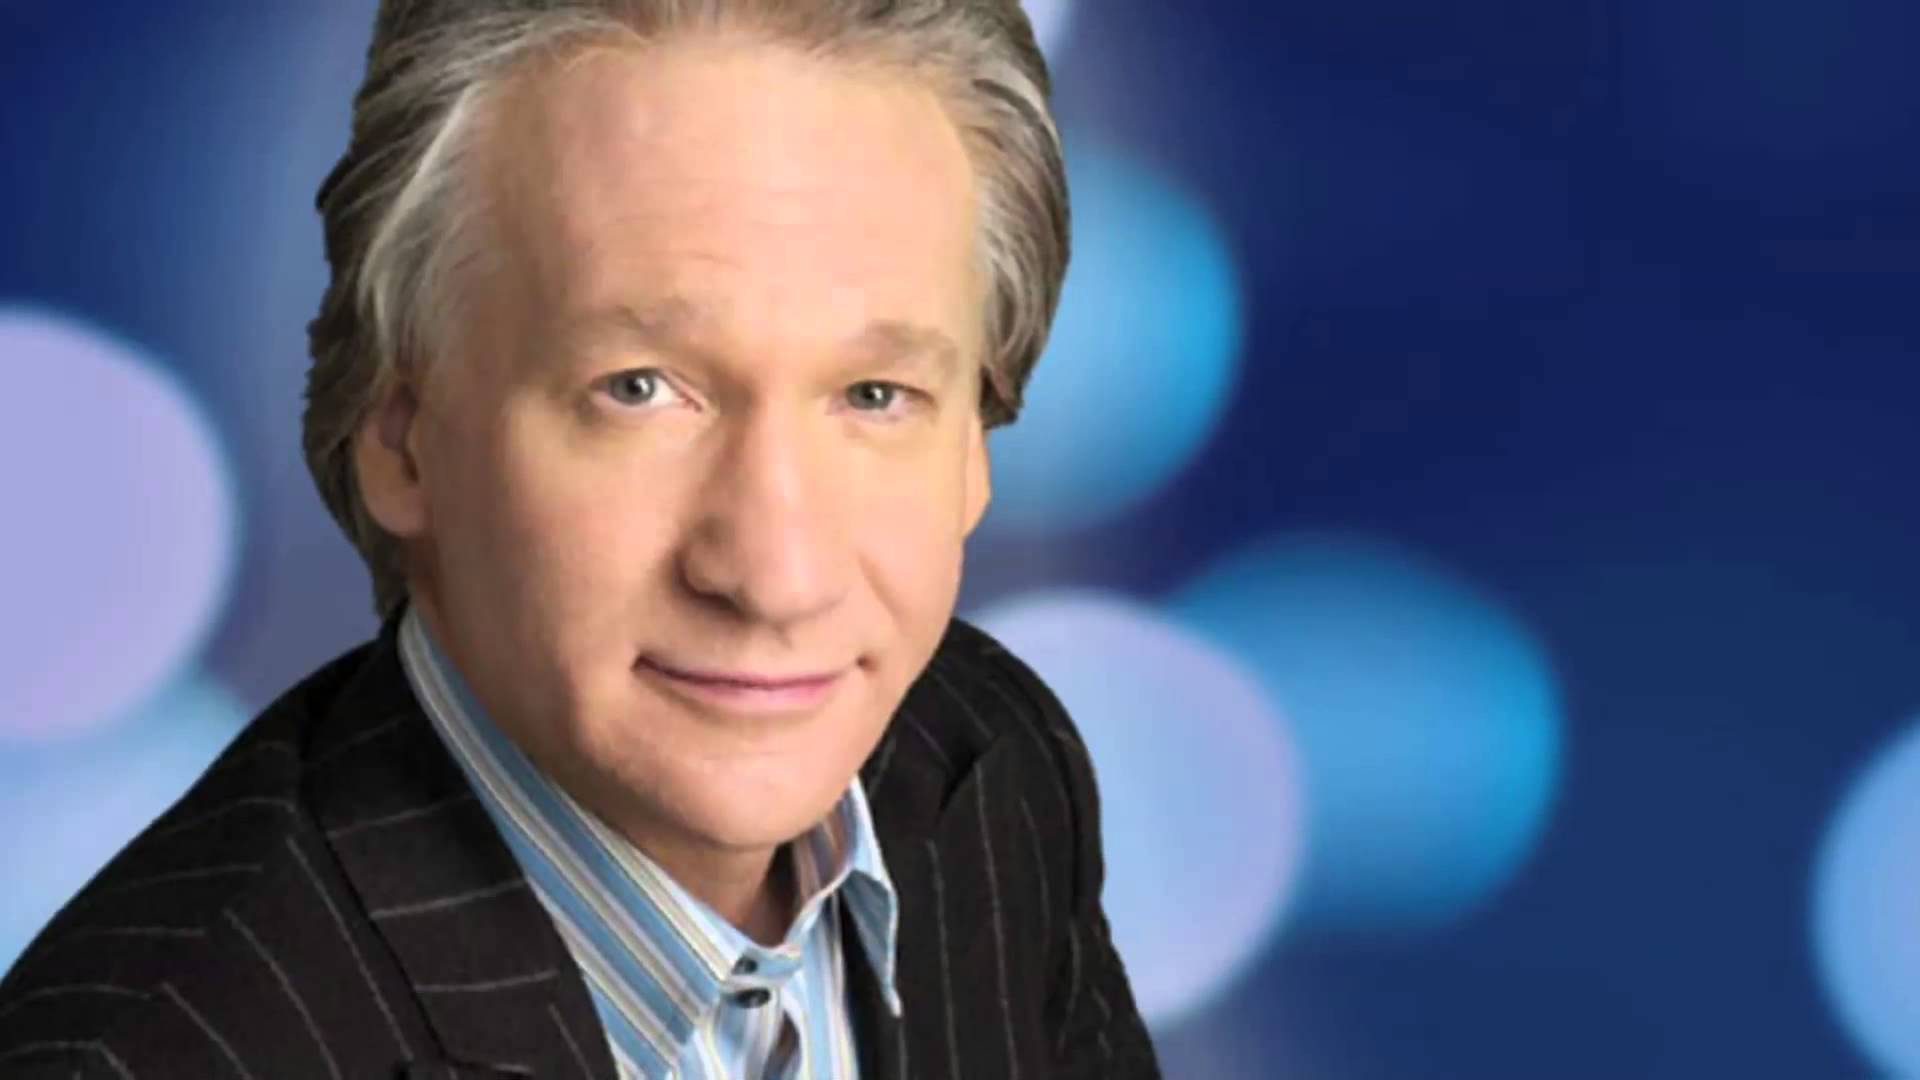 Bill Maher Blazes Weed Joint on TV to Make a Point About Legalization